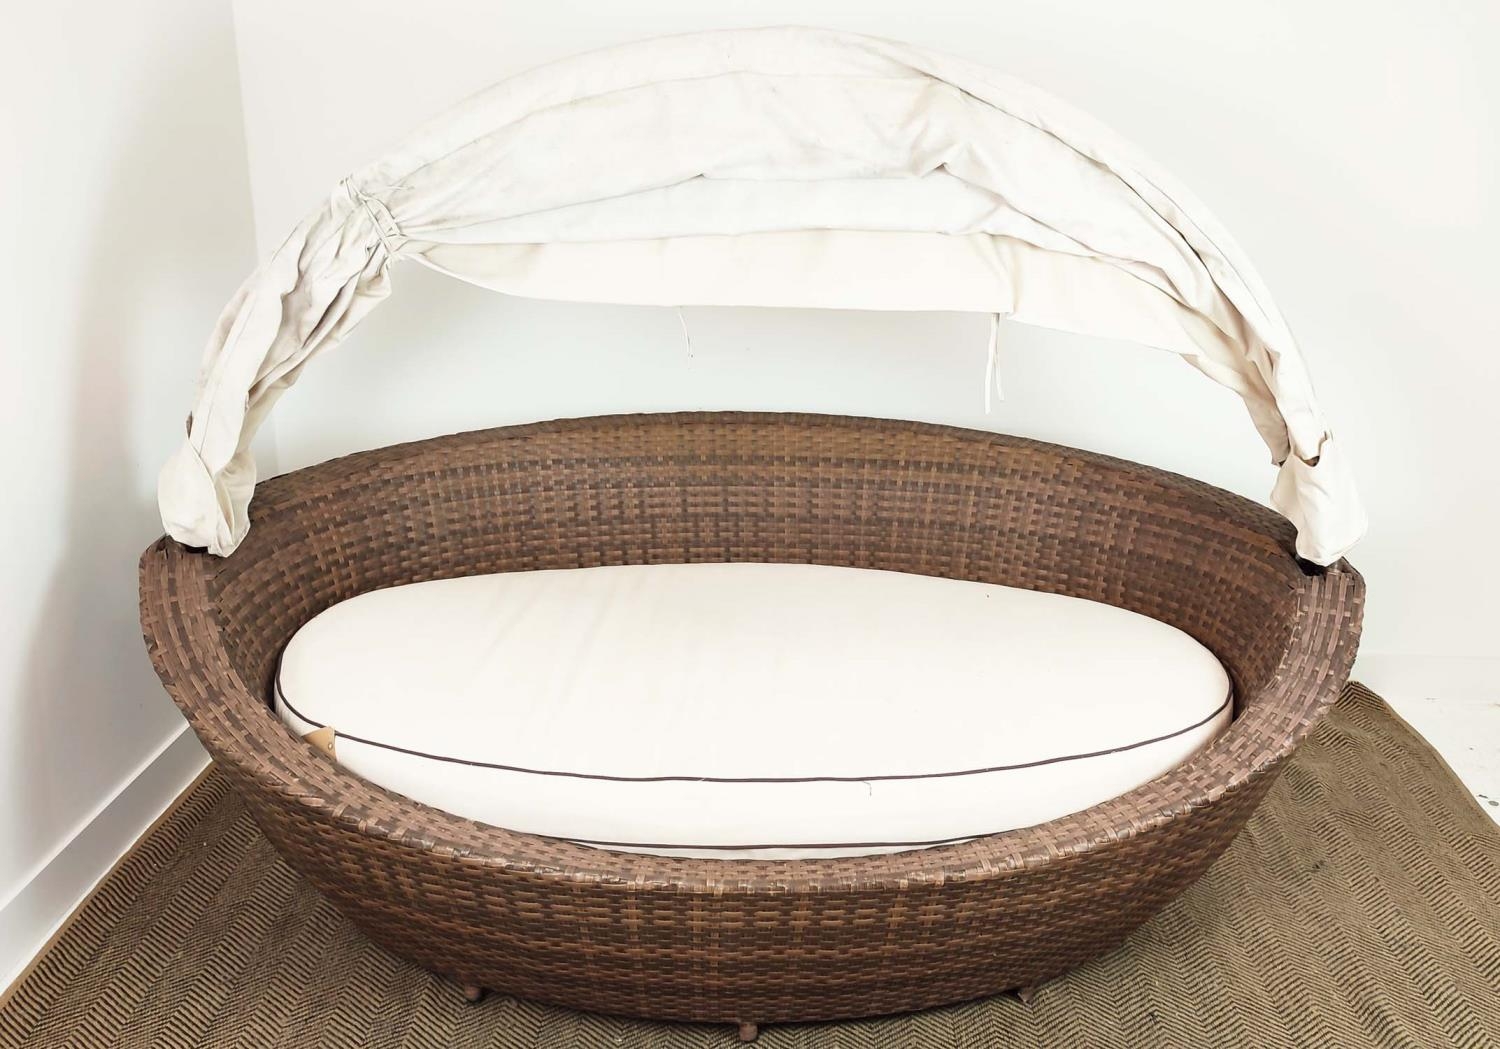 QUATROPI GARDEN DAYBED, with fold back canopy , 220 L x 97cm H. - Image 7 of 8